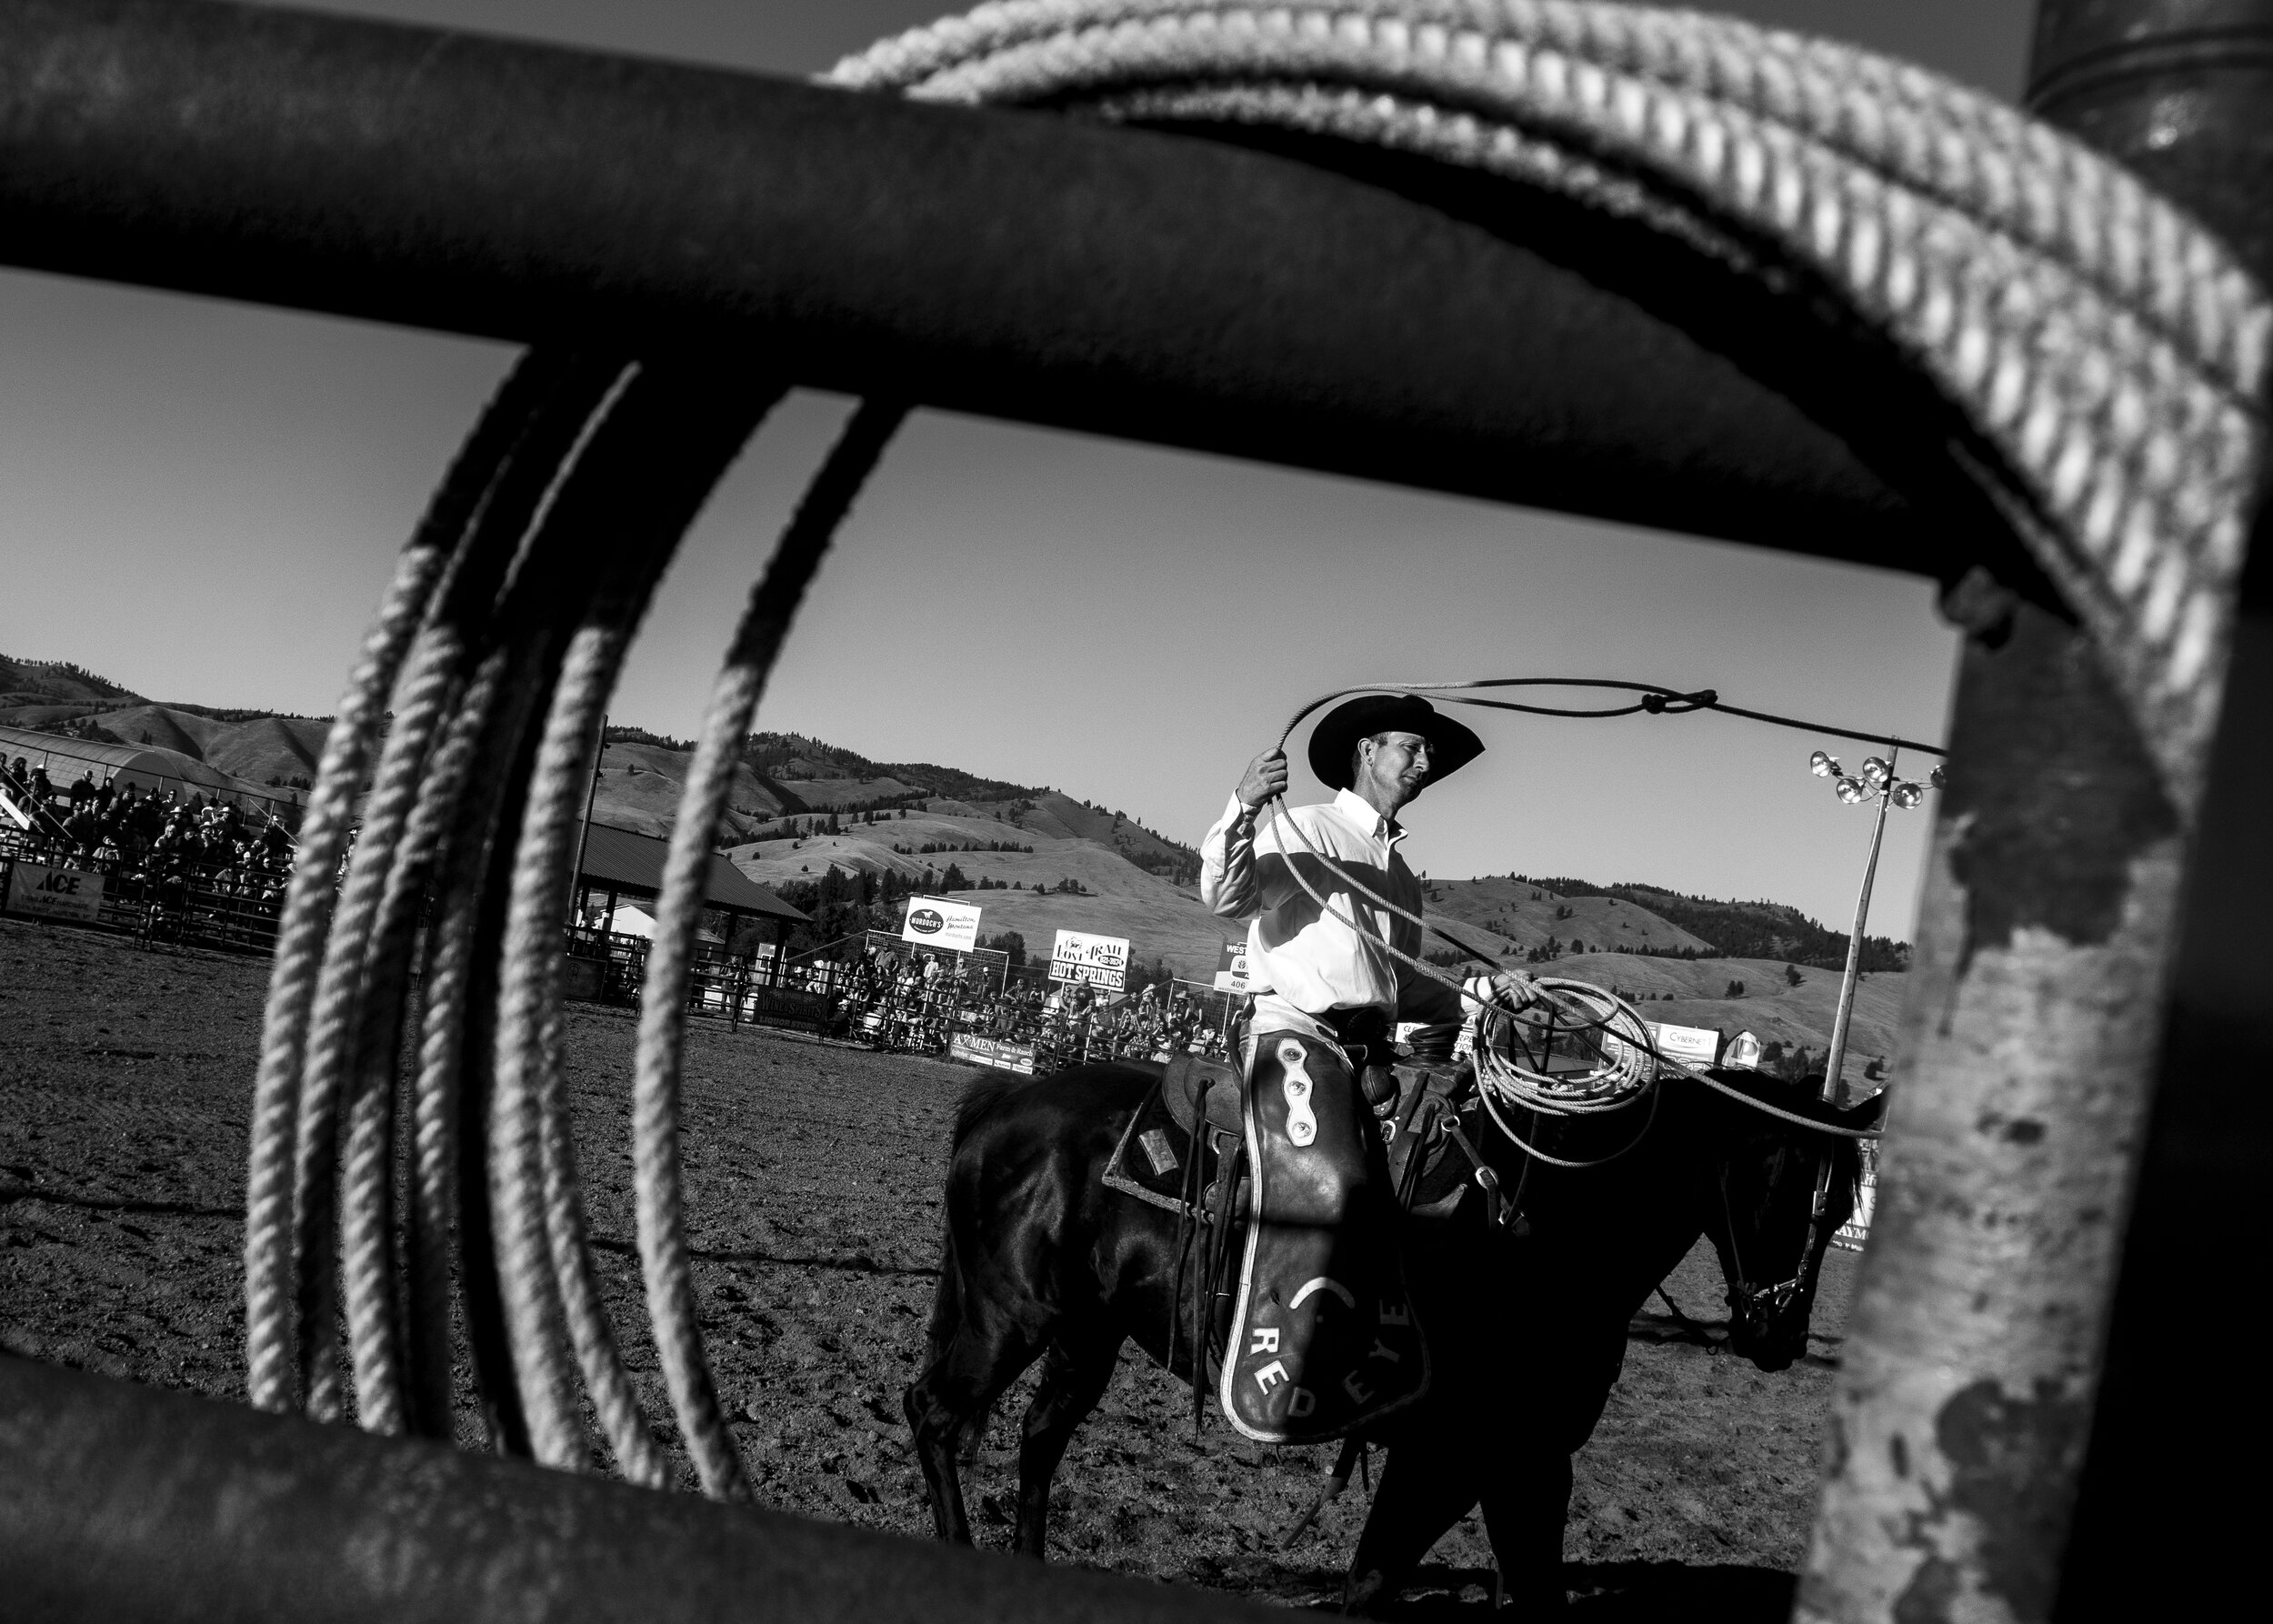  Kaehl Berg, owner of cattle contracting company Red Eye Rodeo, sits on his horse while waiting for the next bull rider at the Twisted Nut Rodeo, July 7, 2020 in Darby, Mont. The Twisted Nut Rodeo is an annual benefit for testicular cancer. 